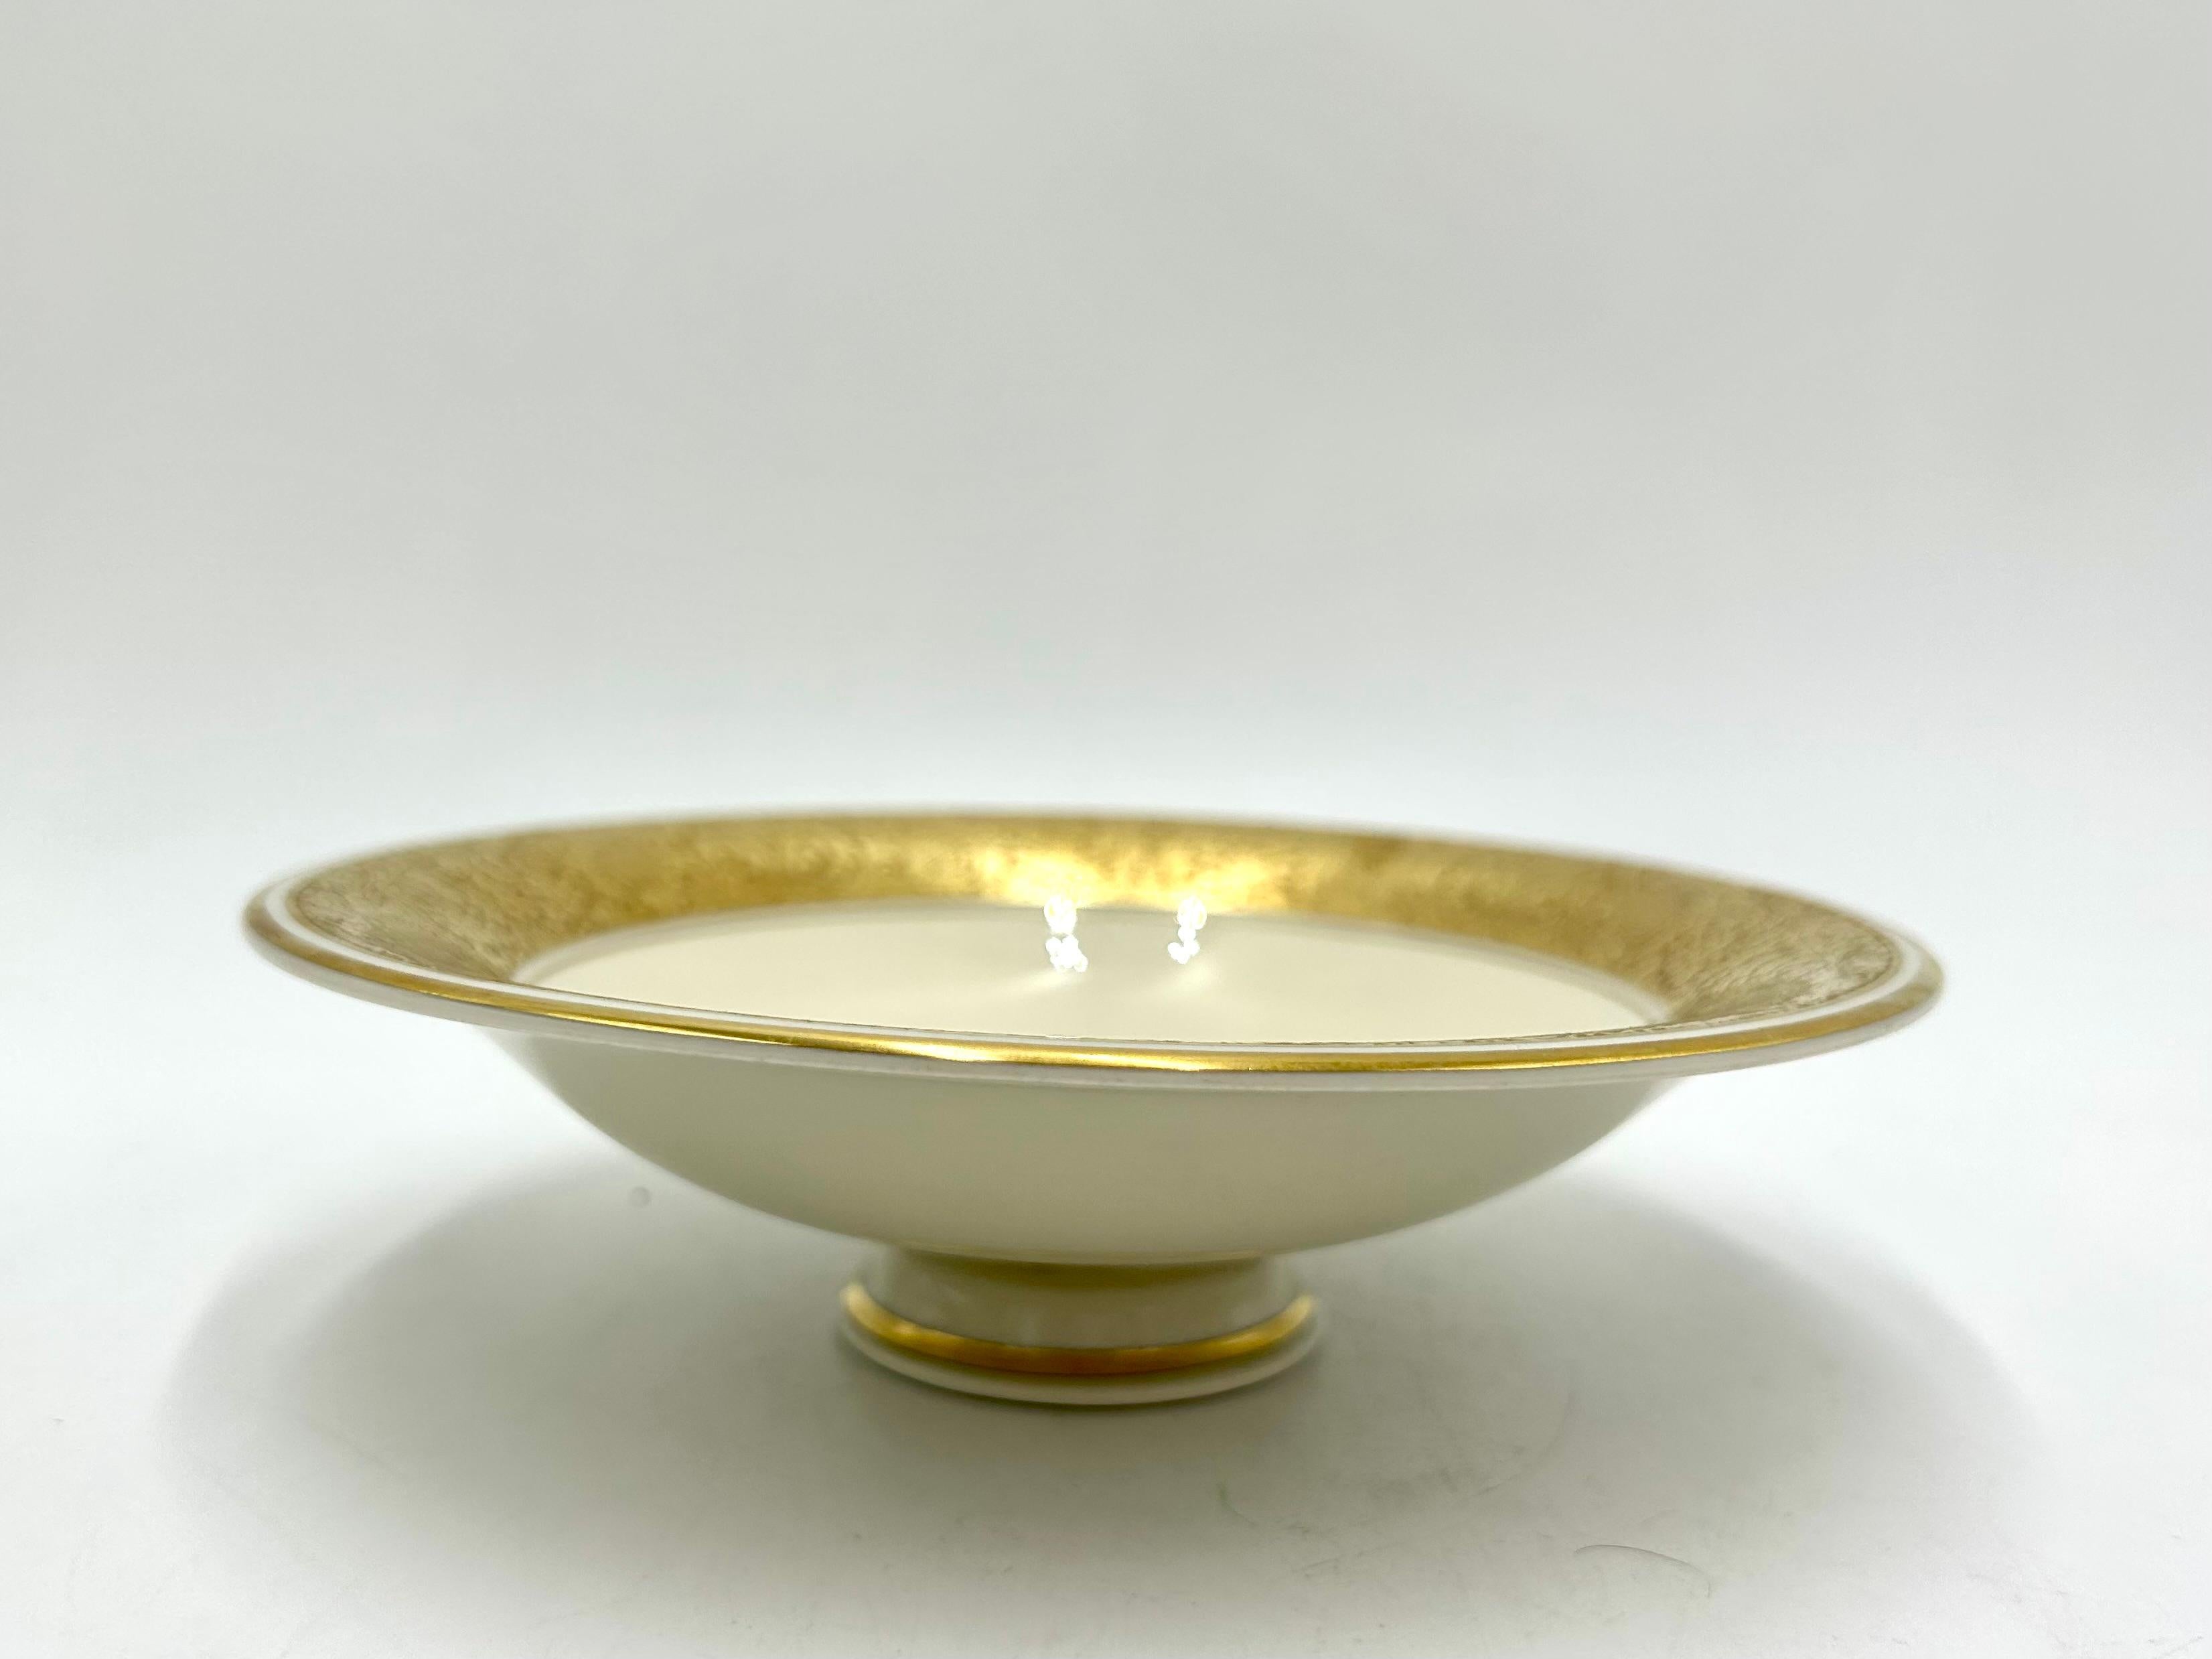 Beautiful porcelain platter-bowl in ecru color decorated with gilding and a floral motif
A product of the valued German manufacturer Rosenthal, marked with the mark used in 1950.
Very good condition, no damage.
height 5 cm, diameter 17 cm.